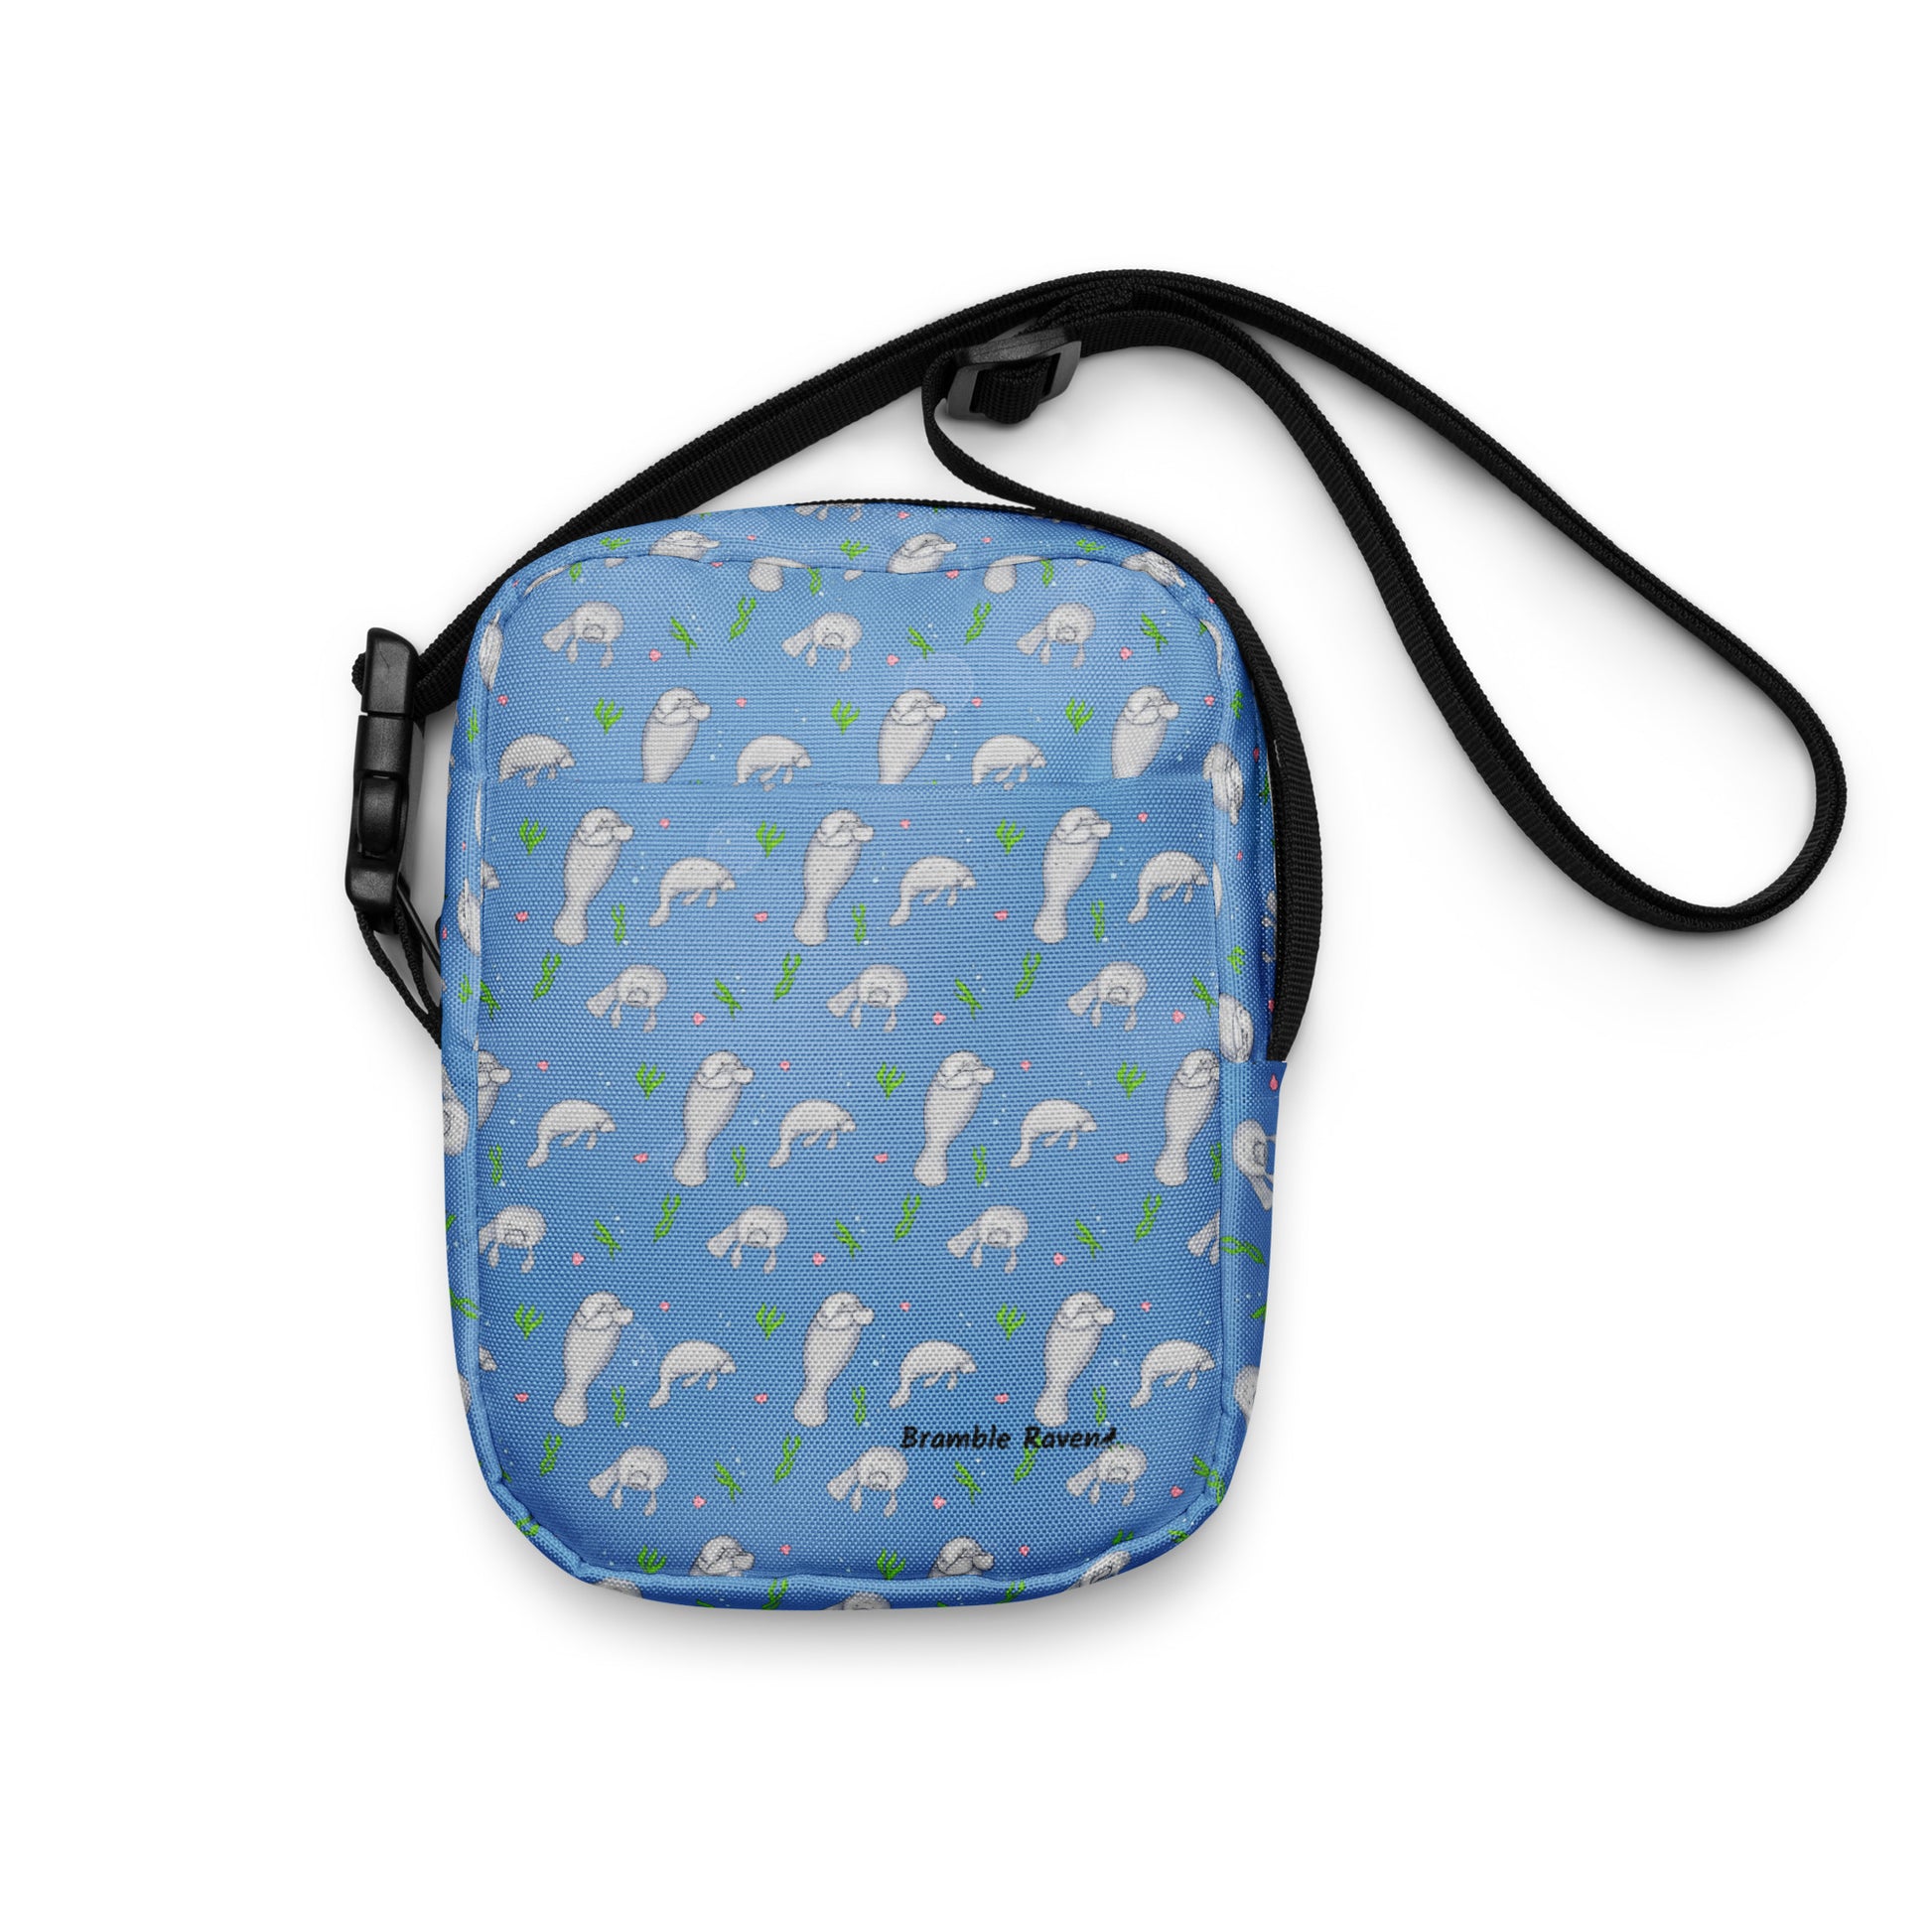 Manatee crossbody utility bag. Front view.